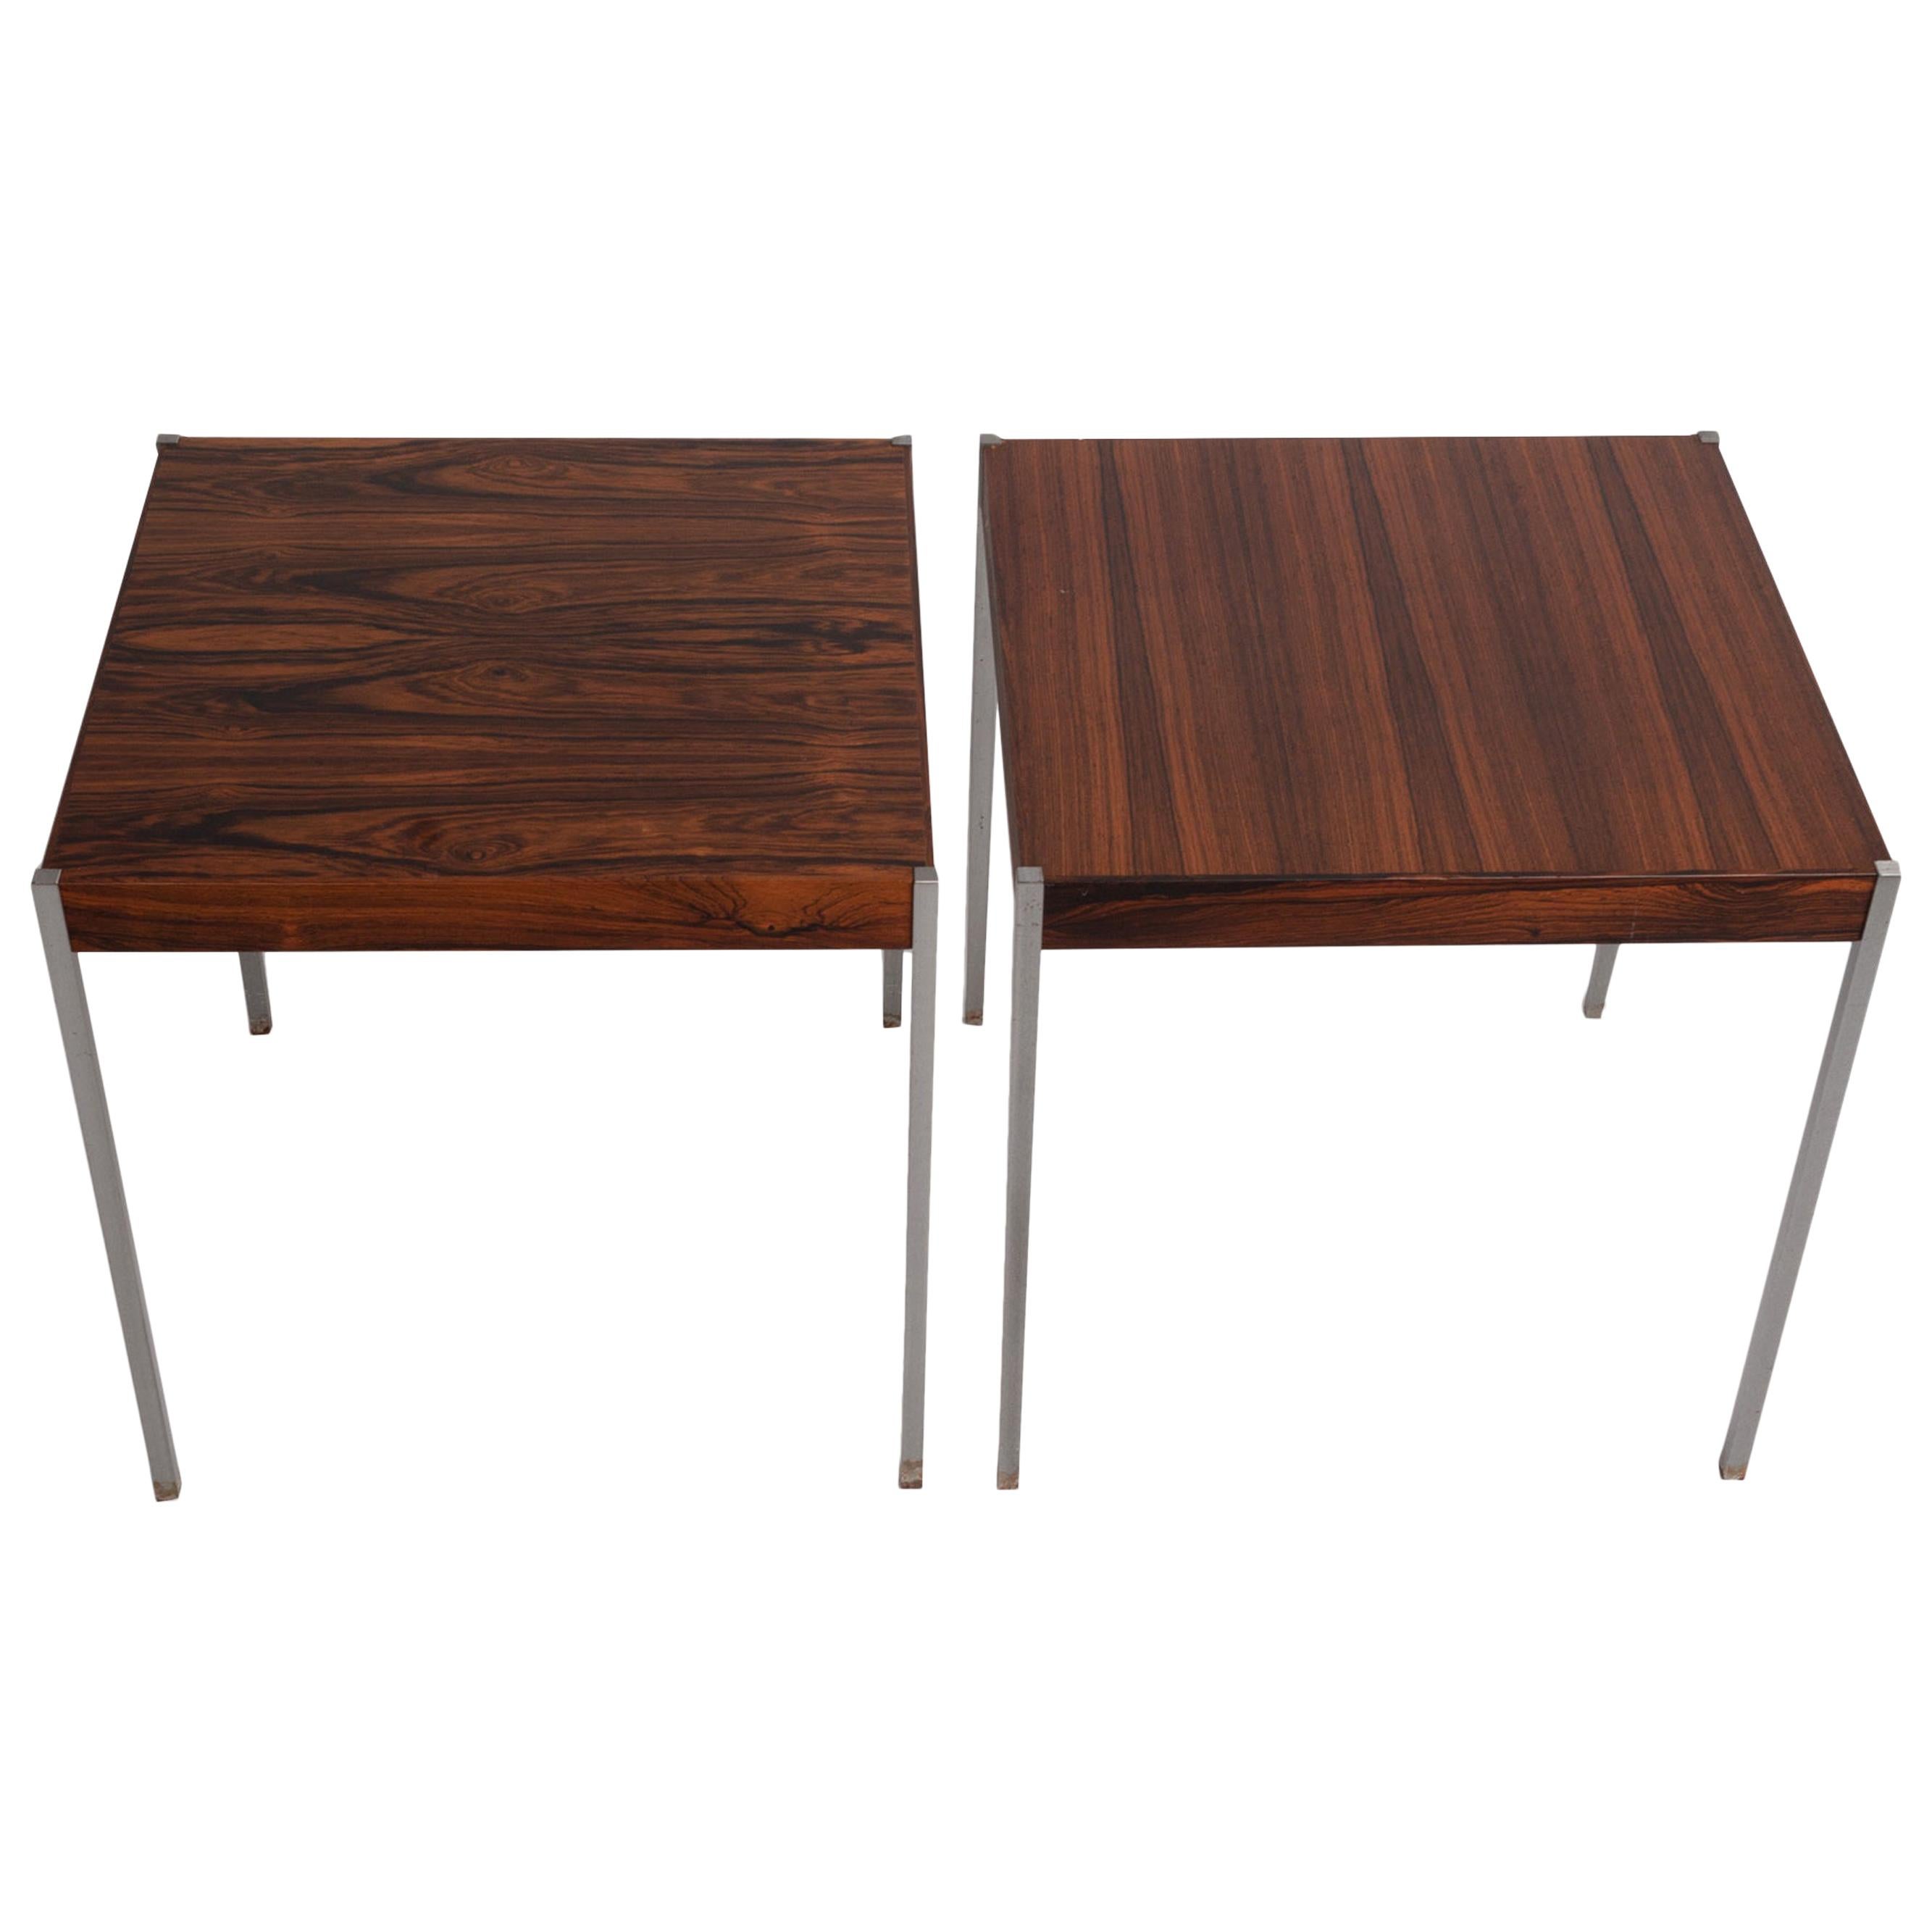 Pair of Midcentury Rosewood Side Tables by Uno & Östen Kristiansson for Luxus